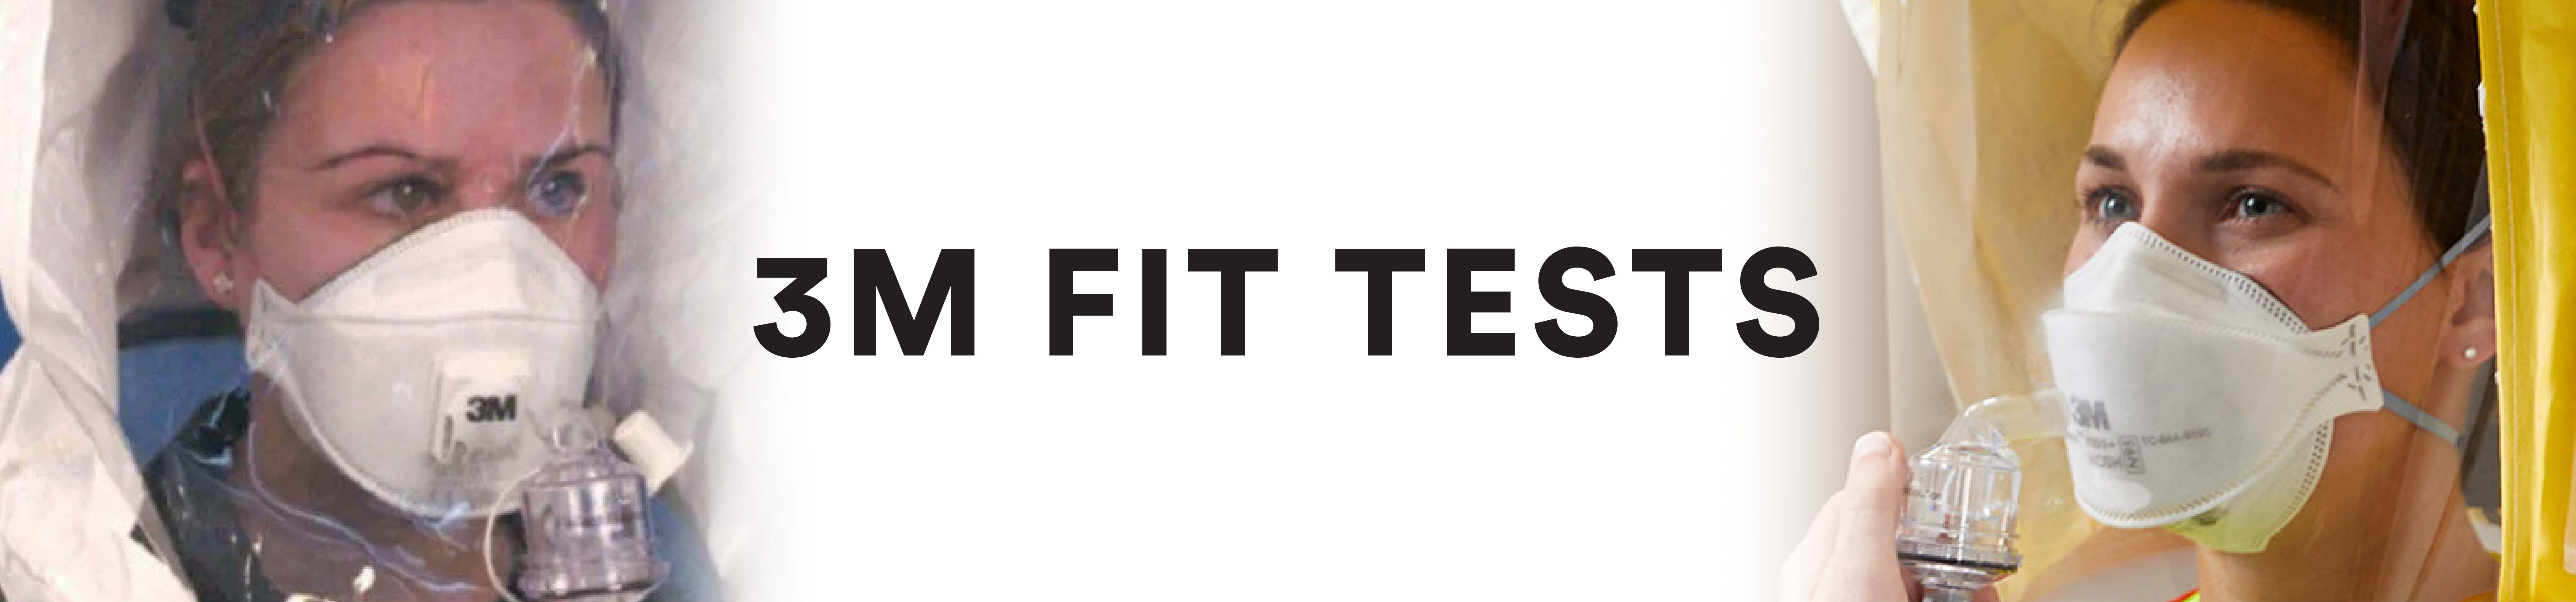 3M Fit Tests